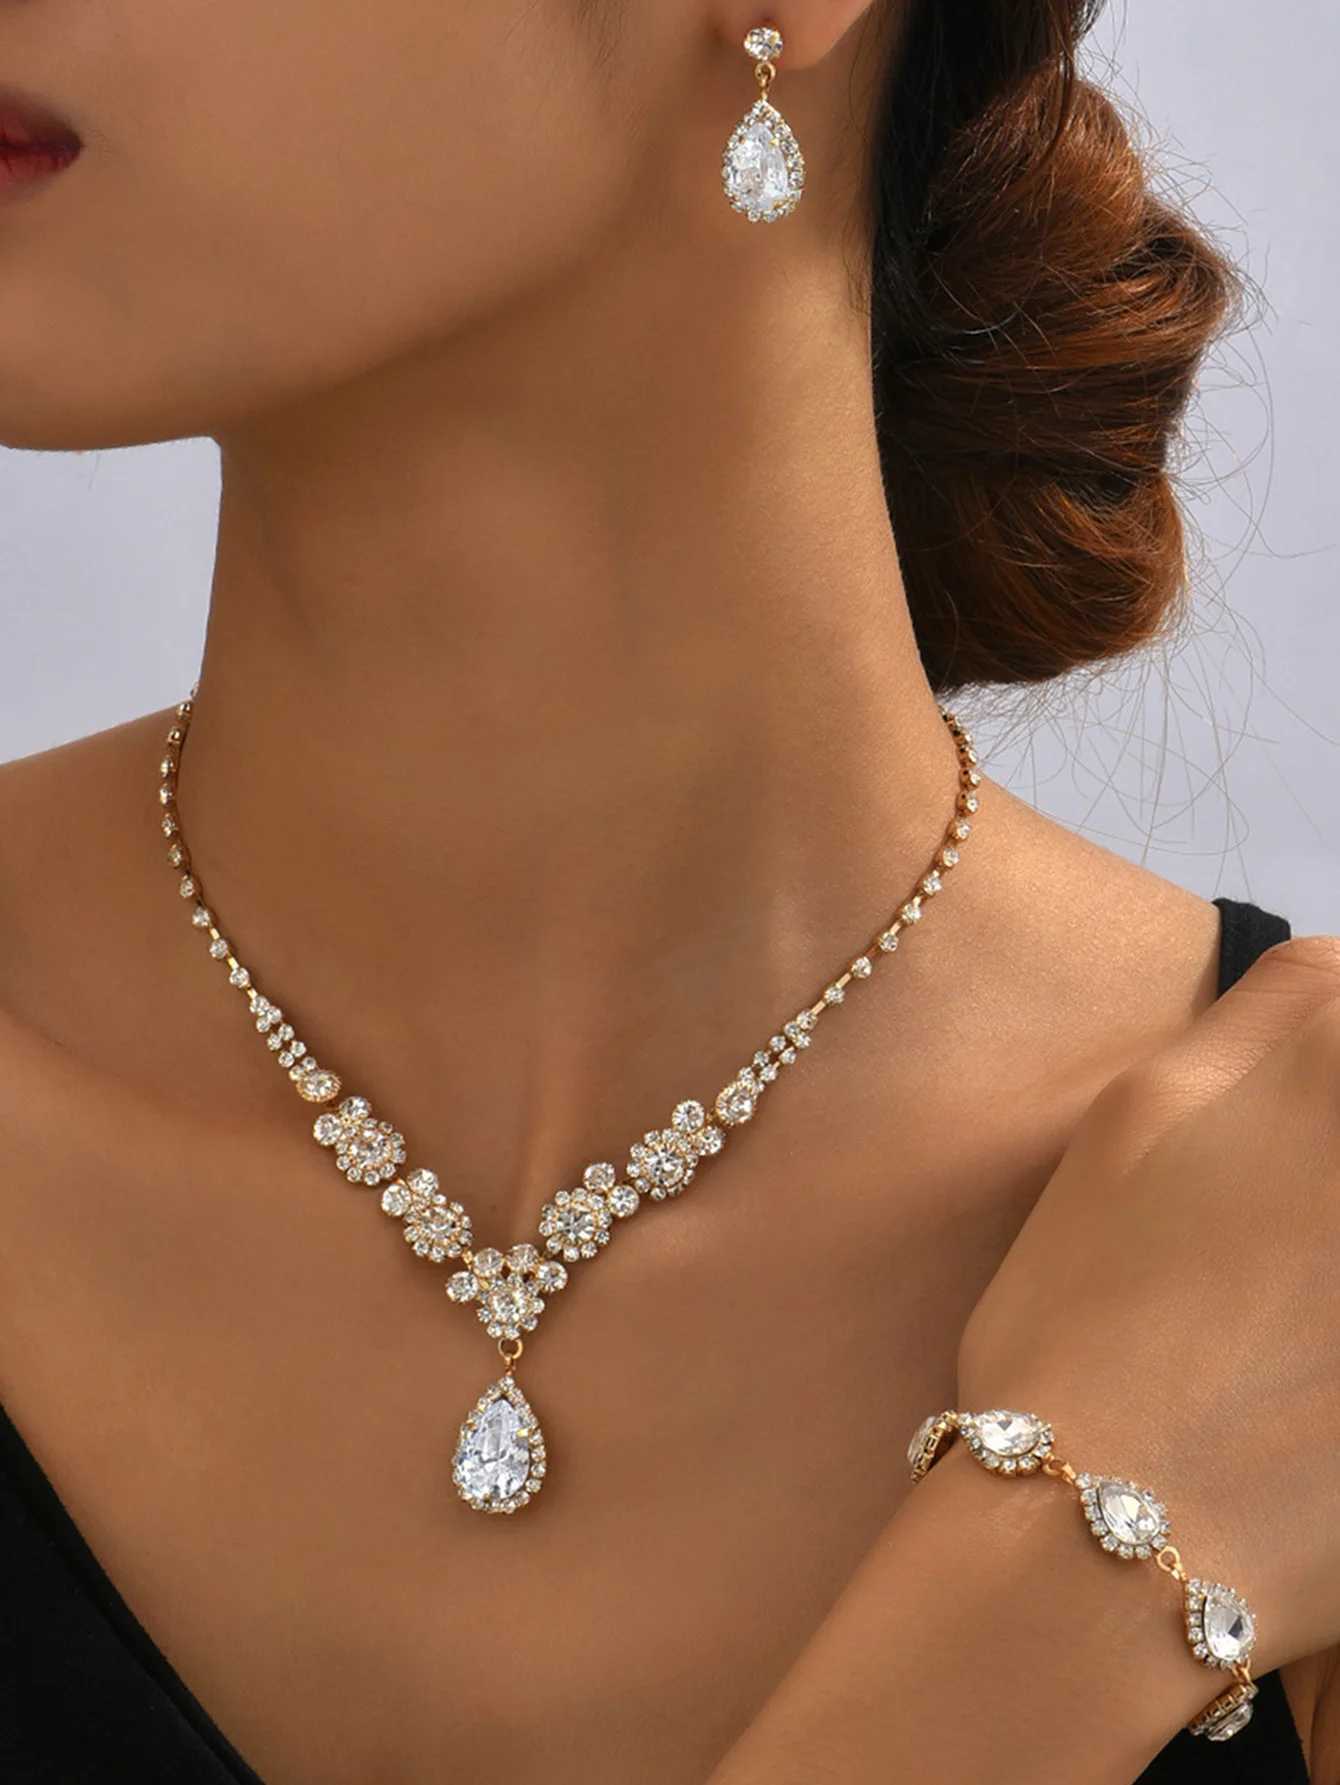 Wedding Jewelry Sets 4 fashionable and luxurious wedding zircon necklaces earrings bracelets womens jewelry sets